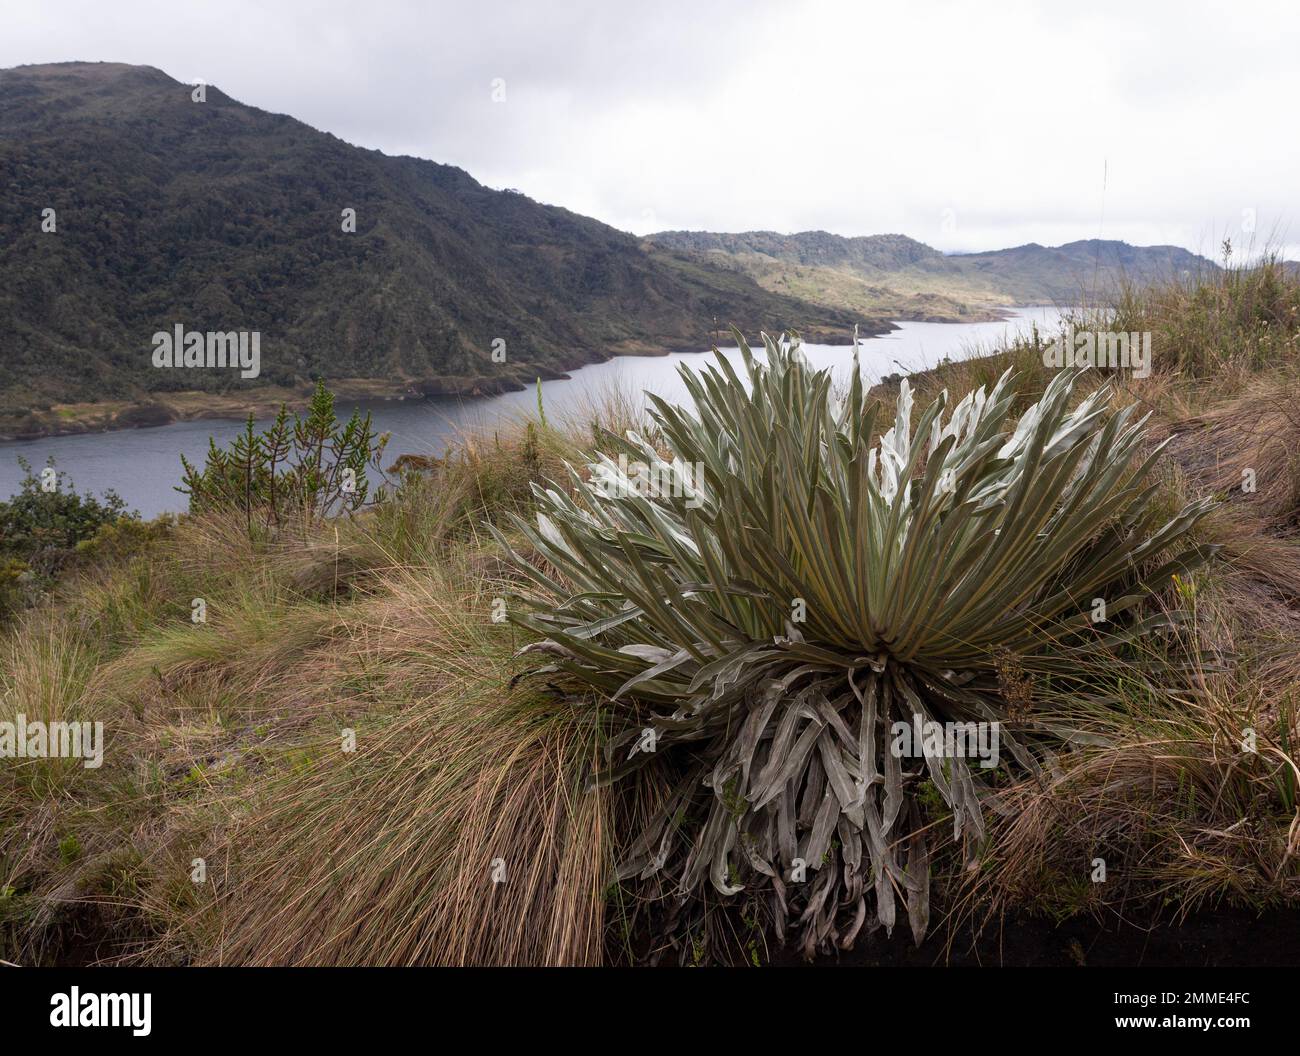 CHINGAZA, COLOMBIA - A Frailejon plant with chuza lake and andean mountains at background inside Chingaza park Stock Photo